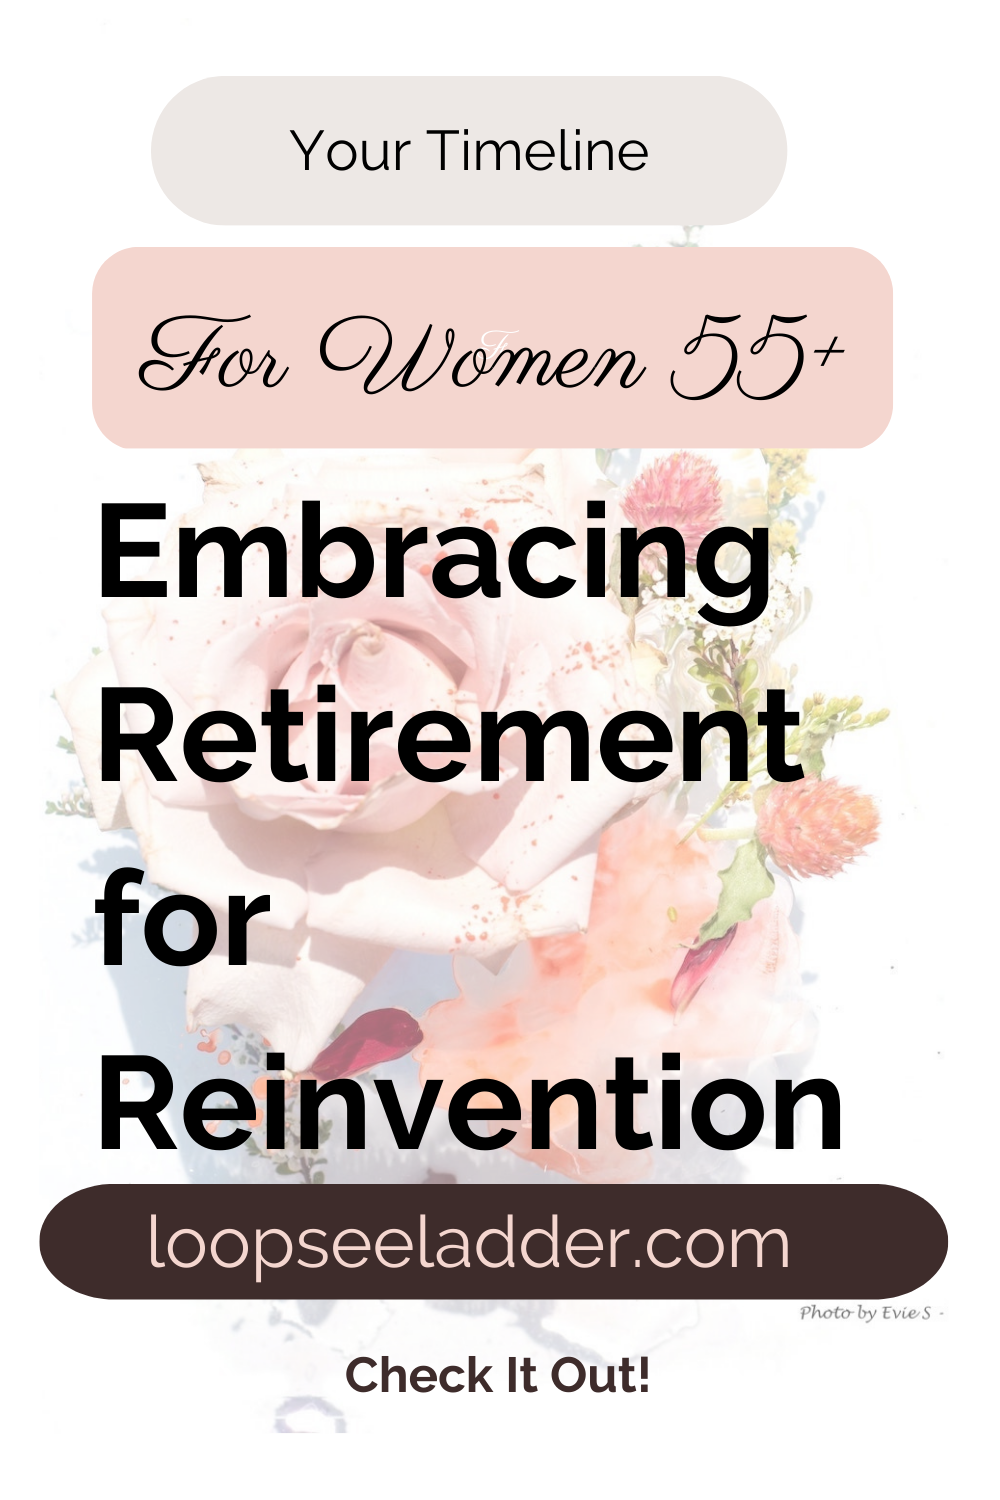 Women 55+ Embracing Retirement as a Time of Reinvention